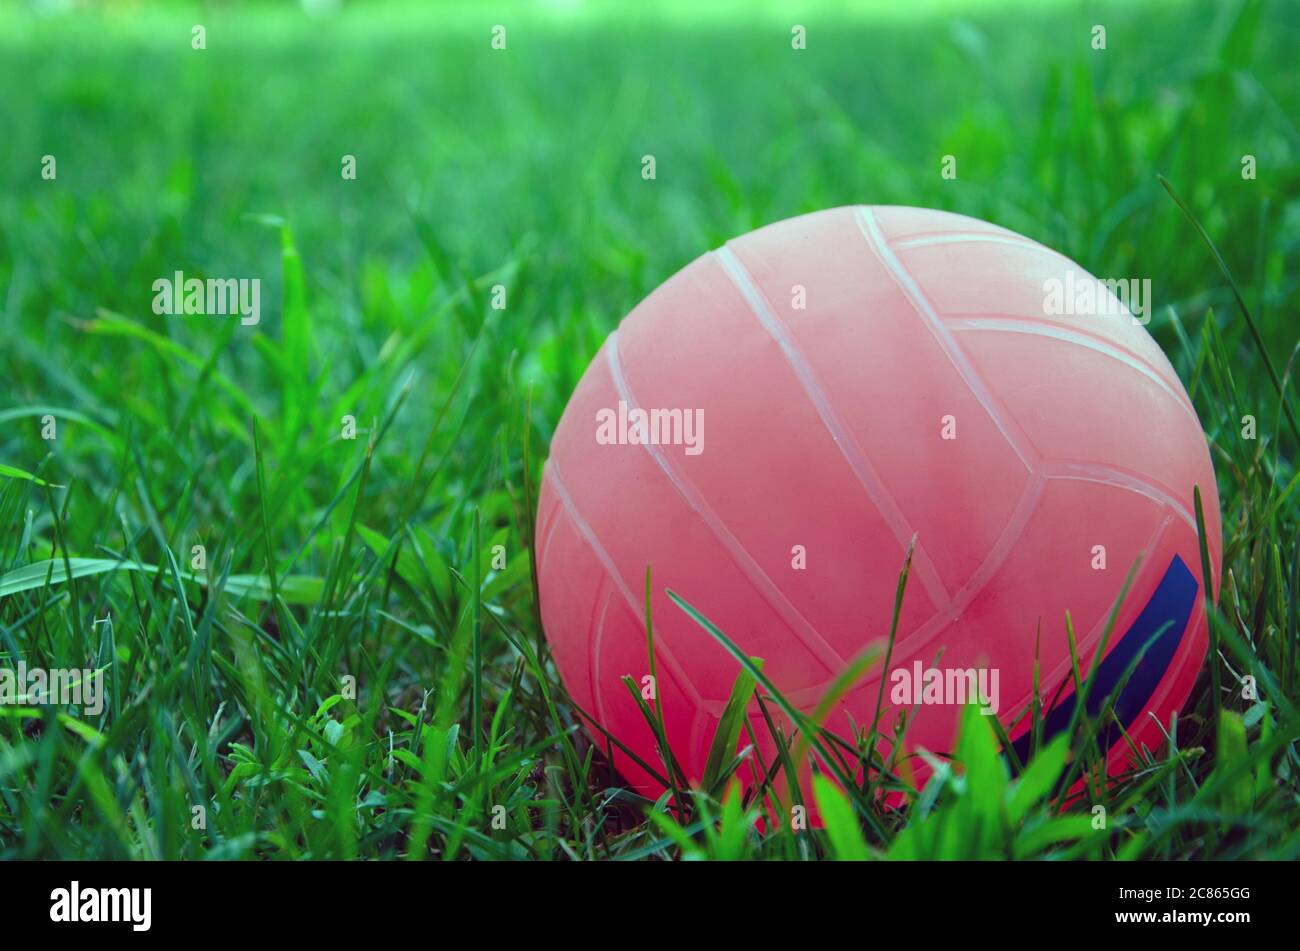 volleyball ball standing on the grass. Volleyball ball on greenery field in park Stock Photo